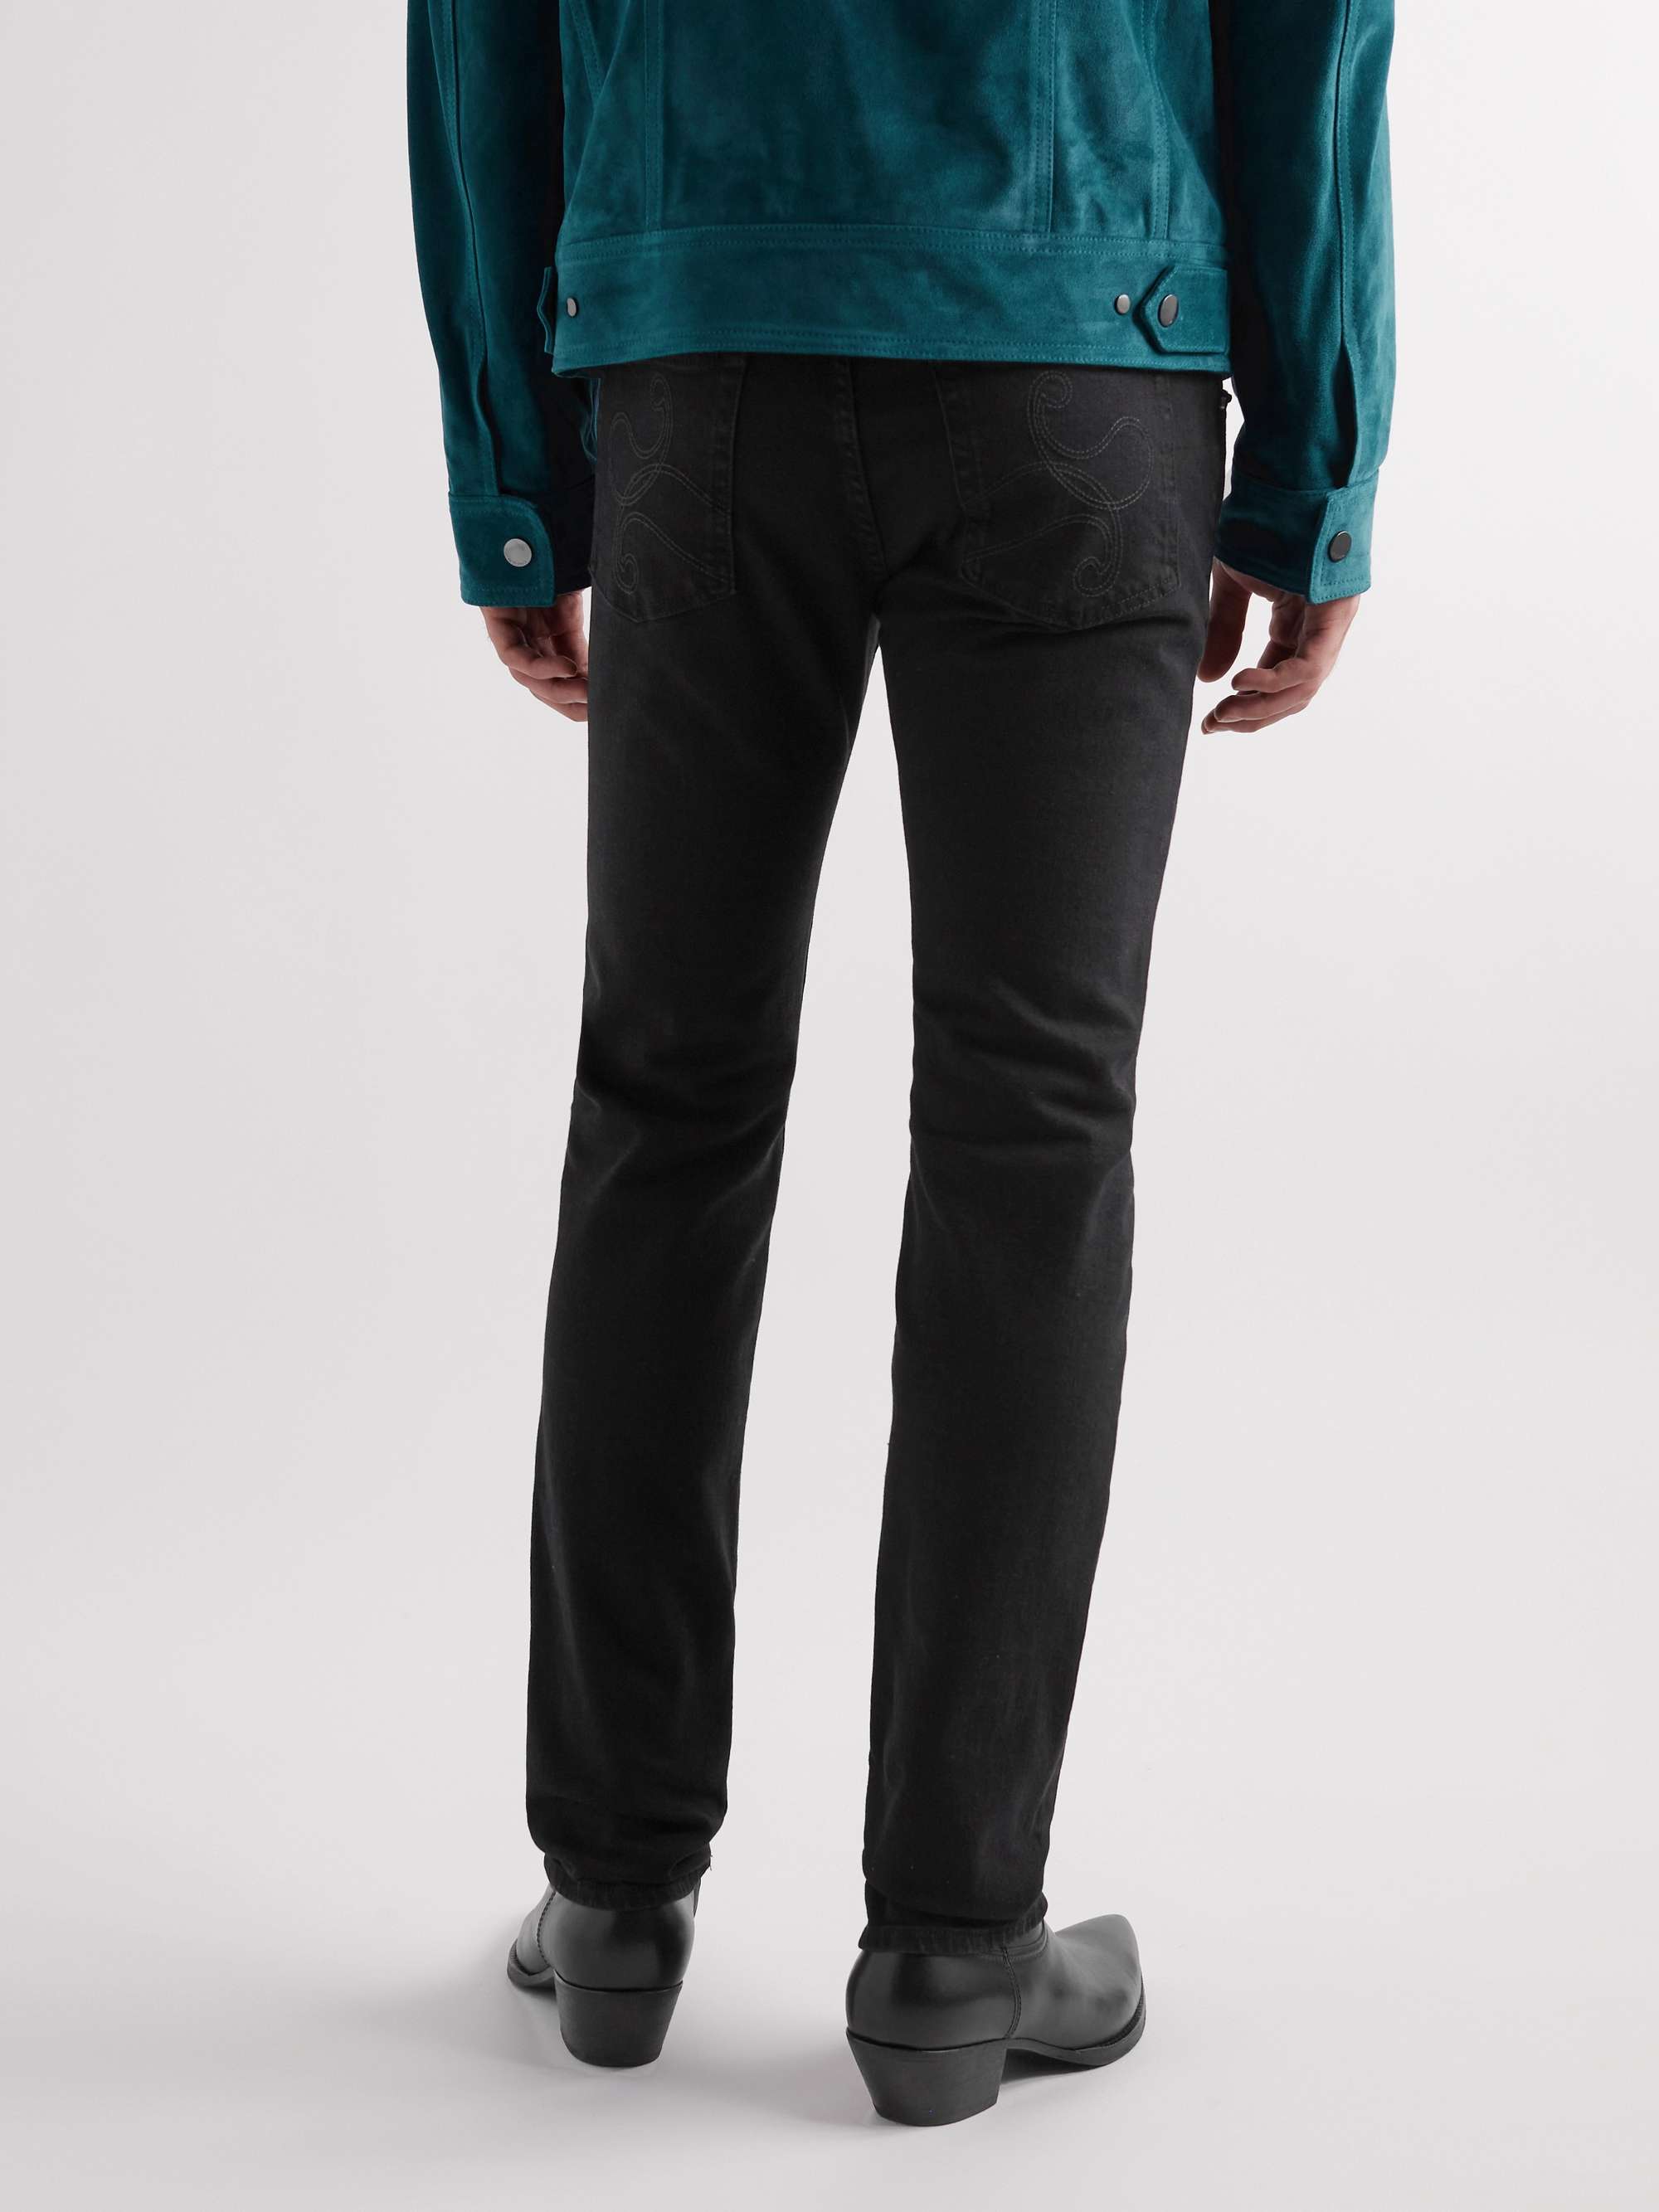 ETRO Straight-Leg Embroidered Jeans